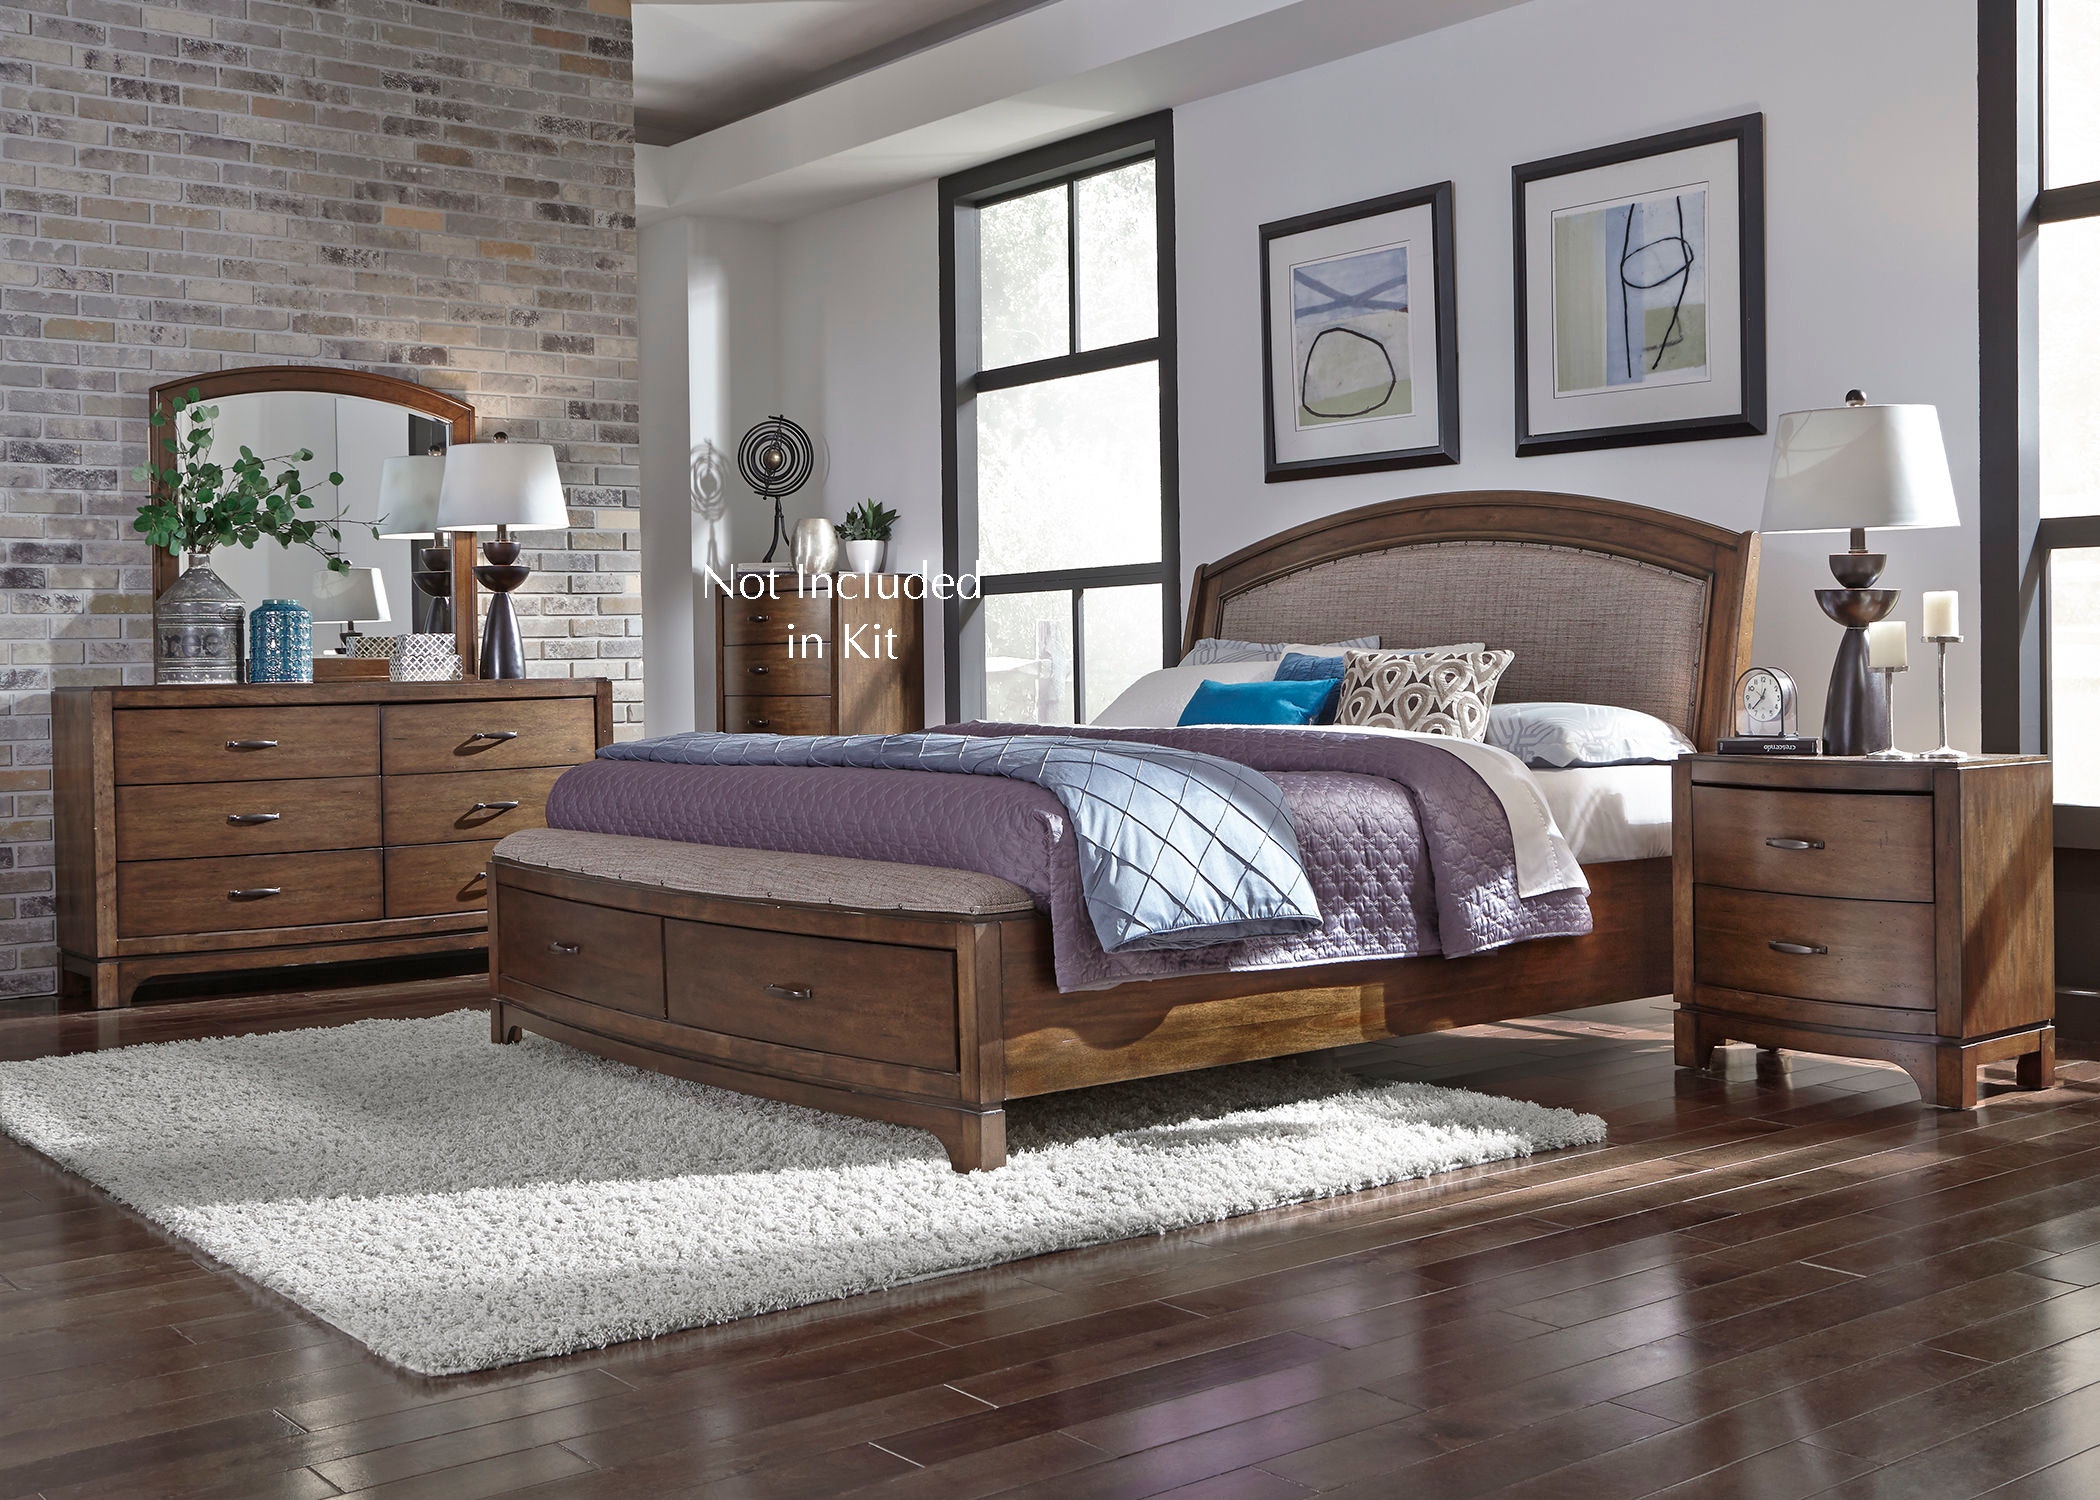 liberty furniture bedroom king storage bed, dresser and mirror 705